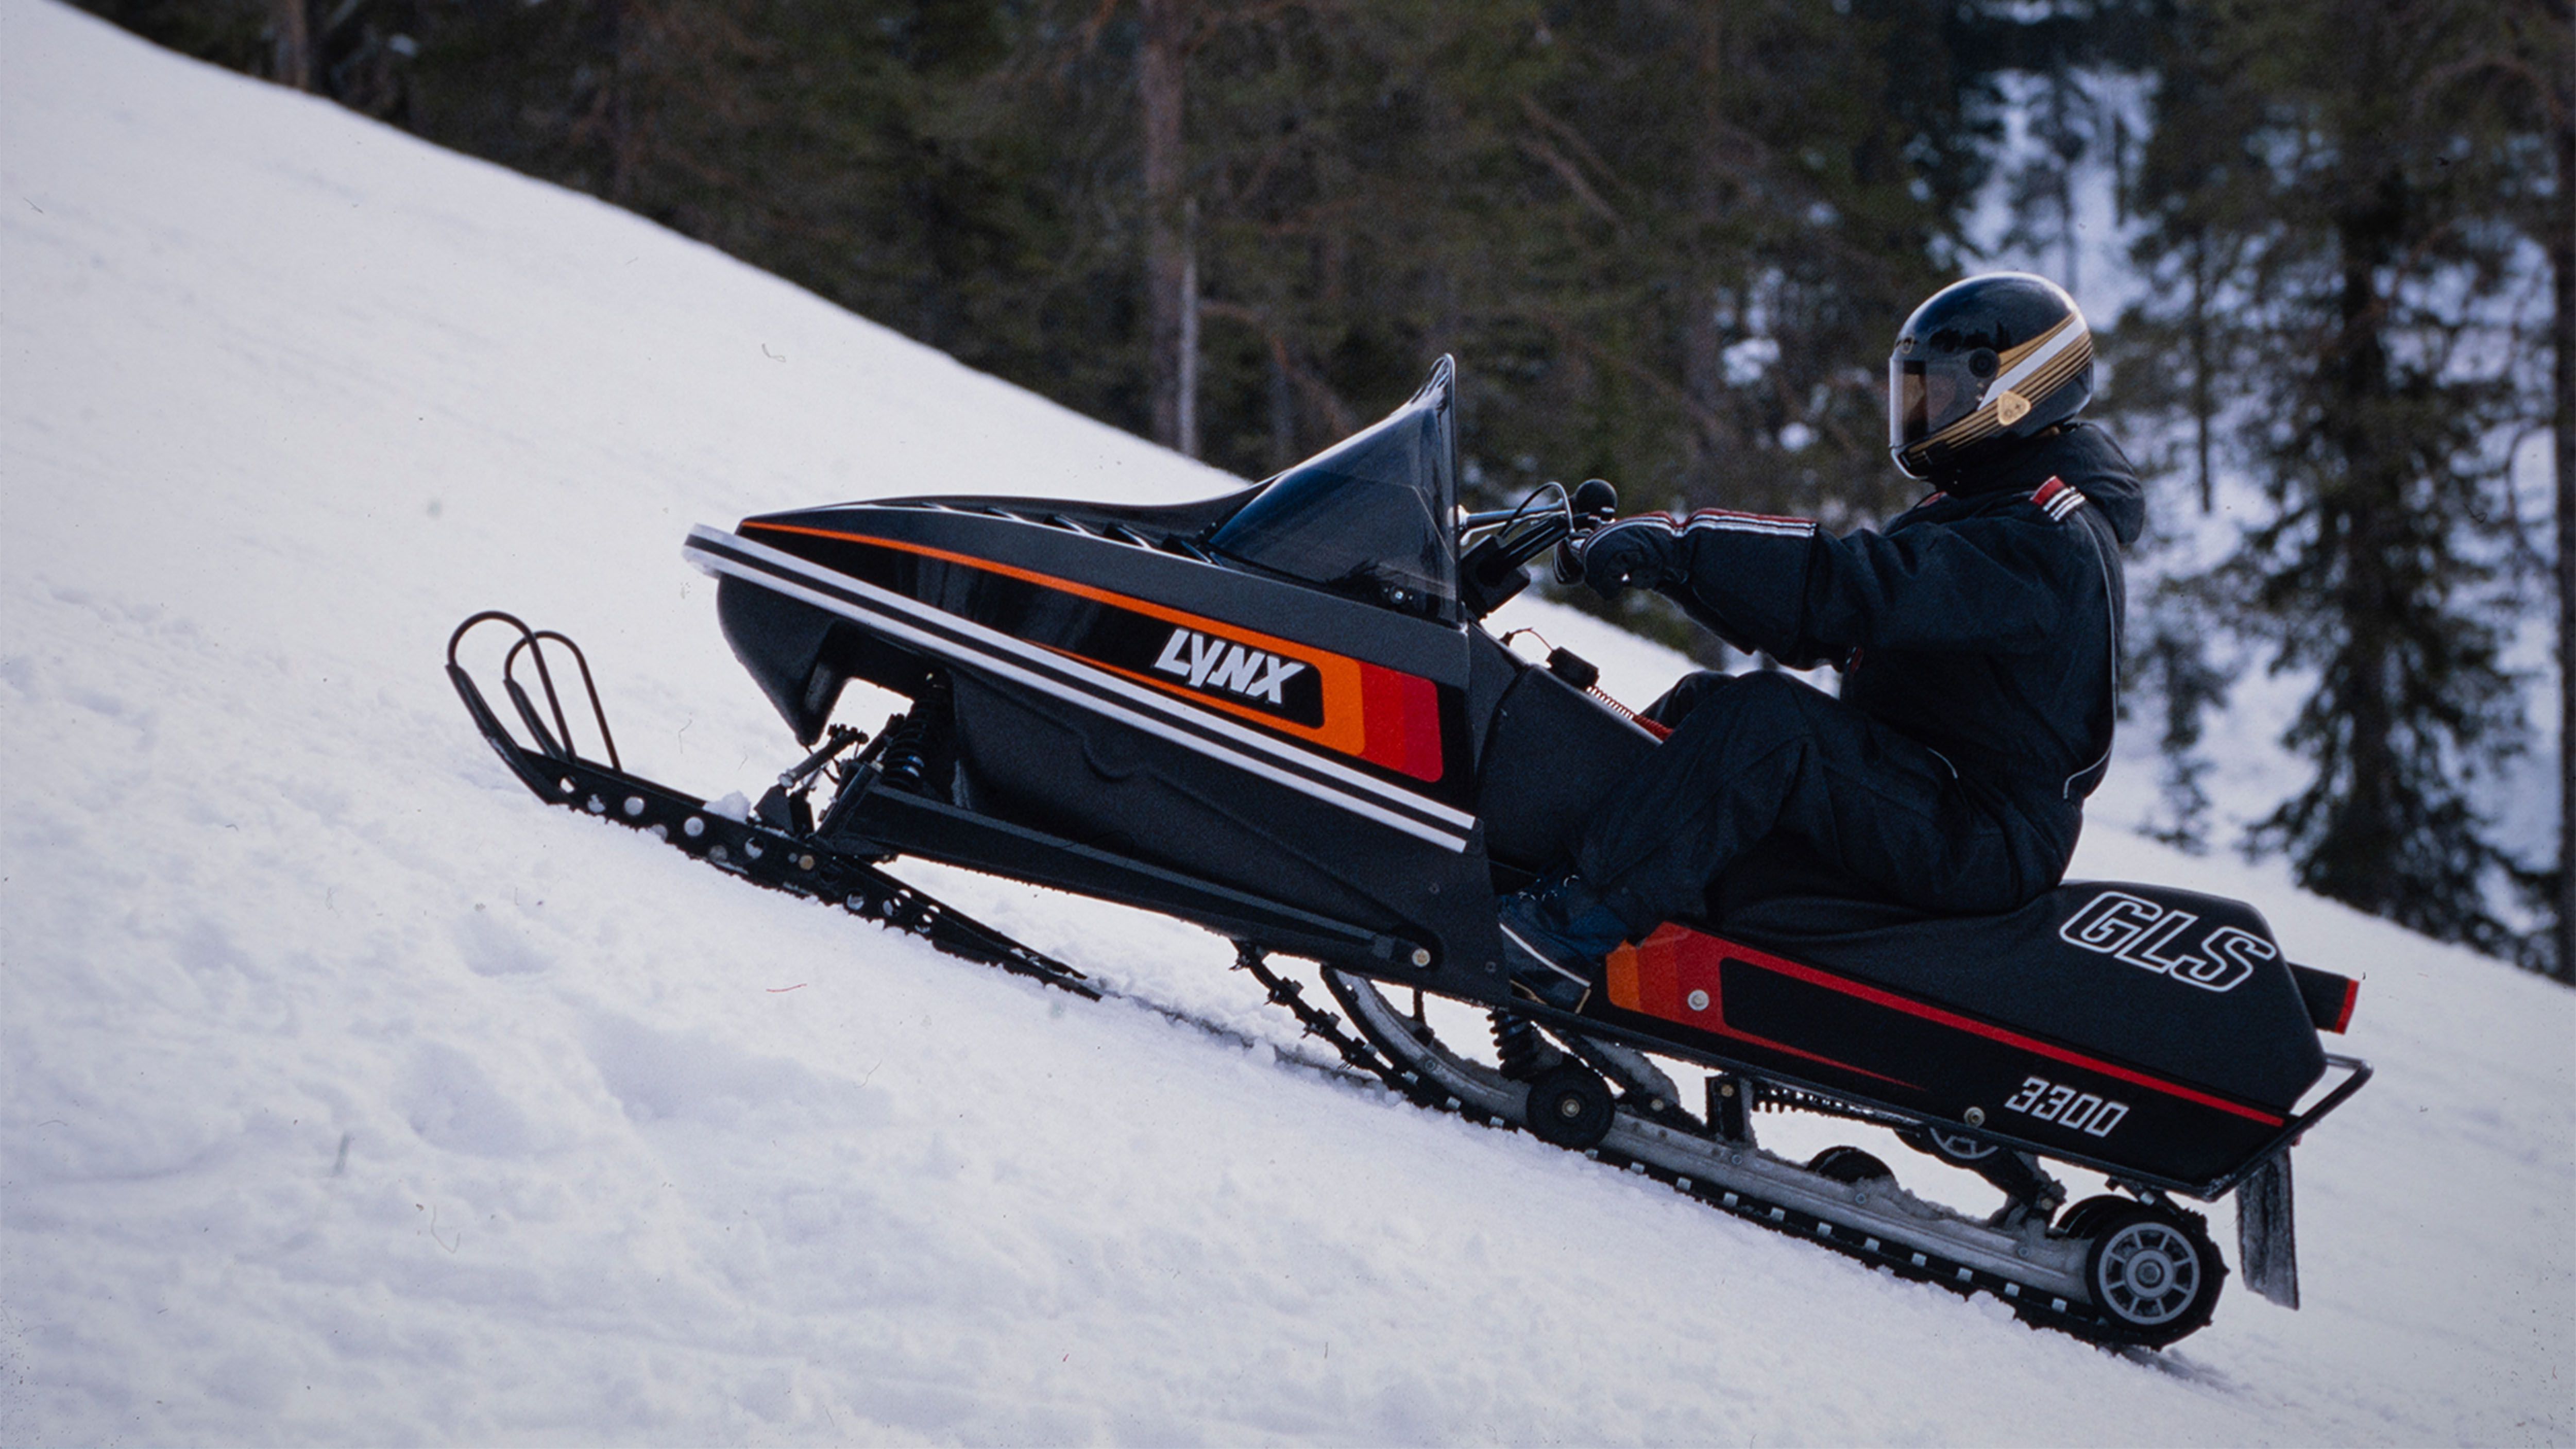 Lynx 3300 sport snowmobile parked on a slope